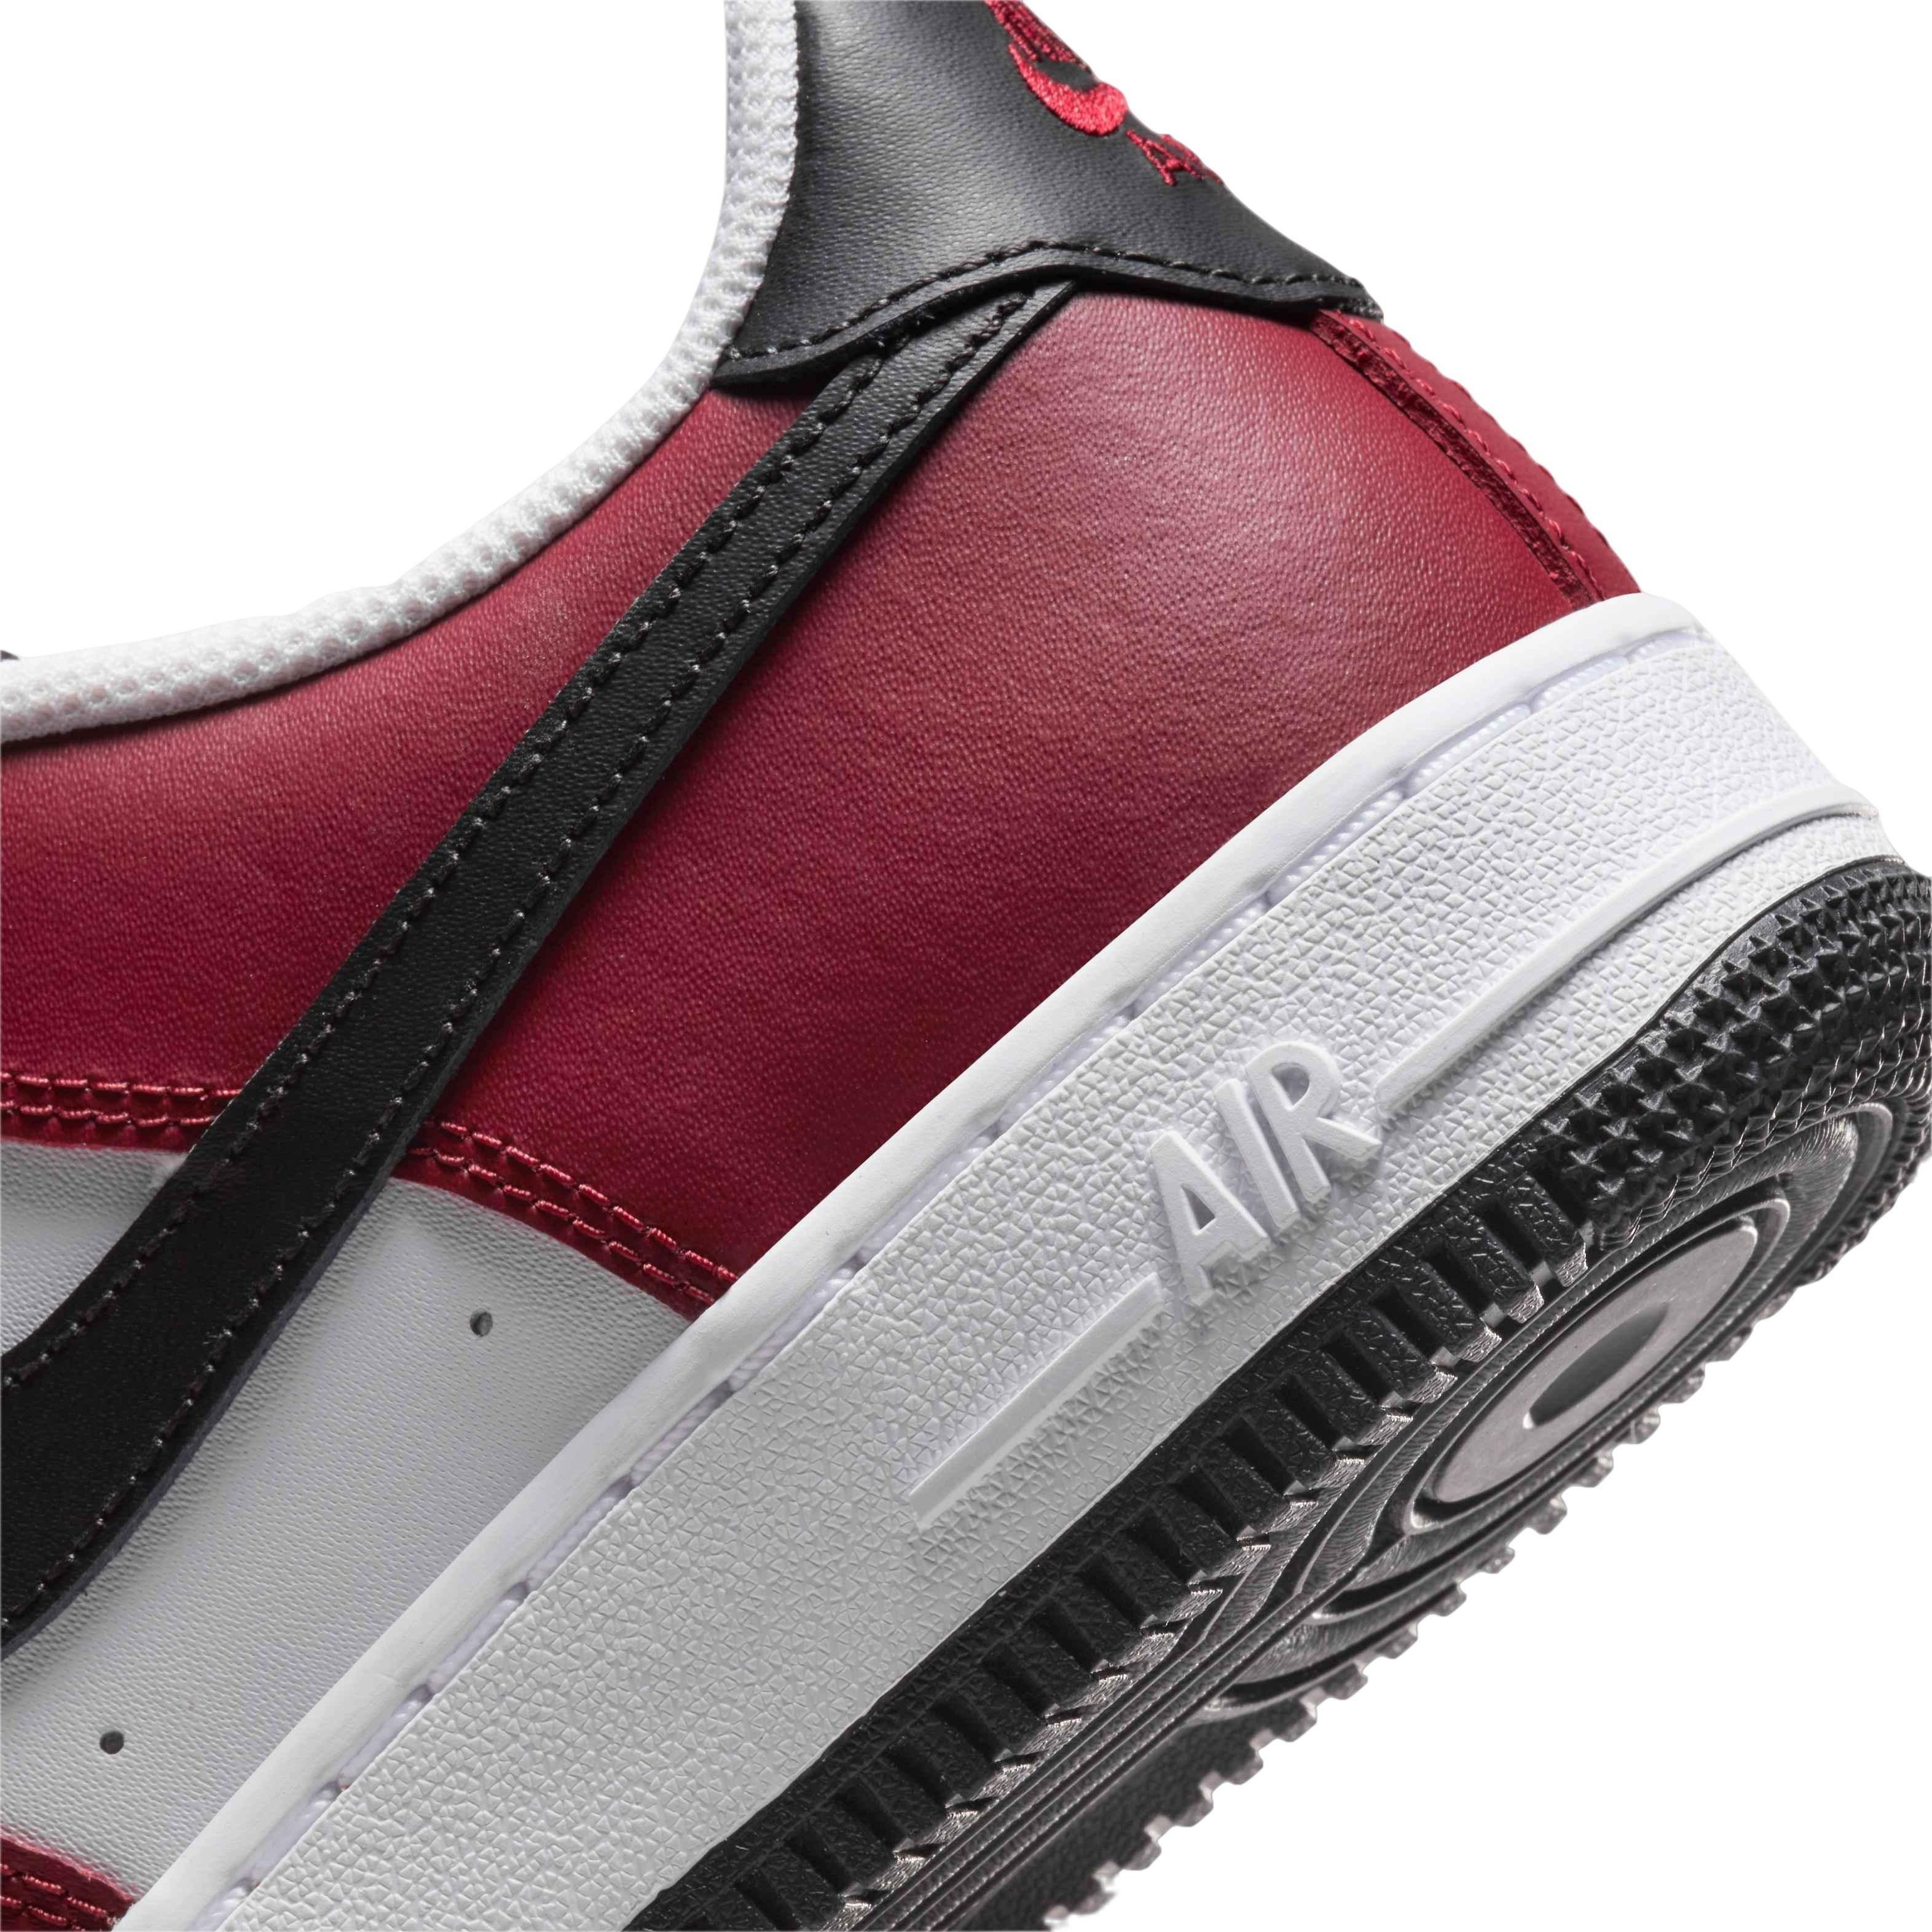 Men's Nike Air Force 1 Low Leather 'Gym Red' White Size 8-13 OW Inspired